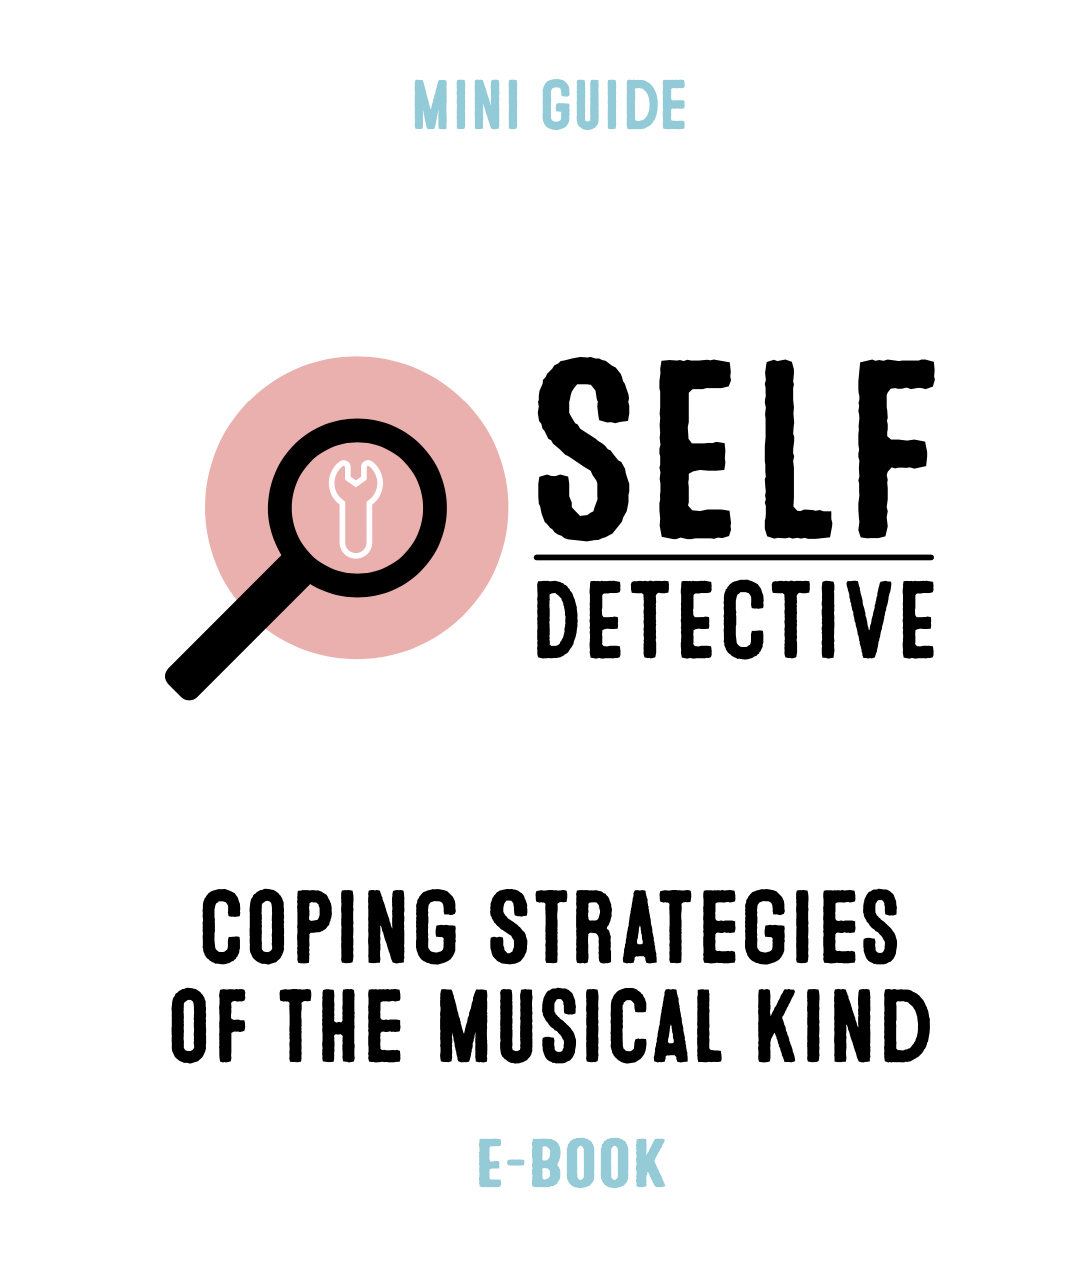 Coping Strategies of the Musical Kind (E-book version)